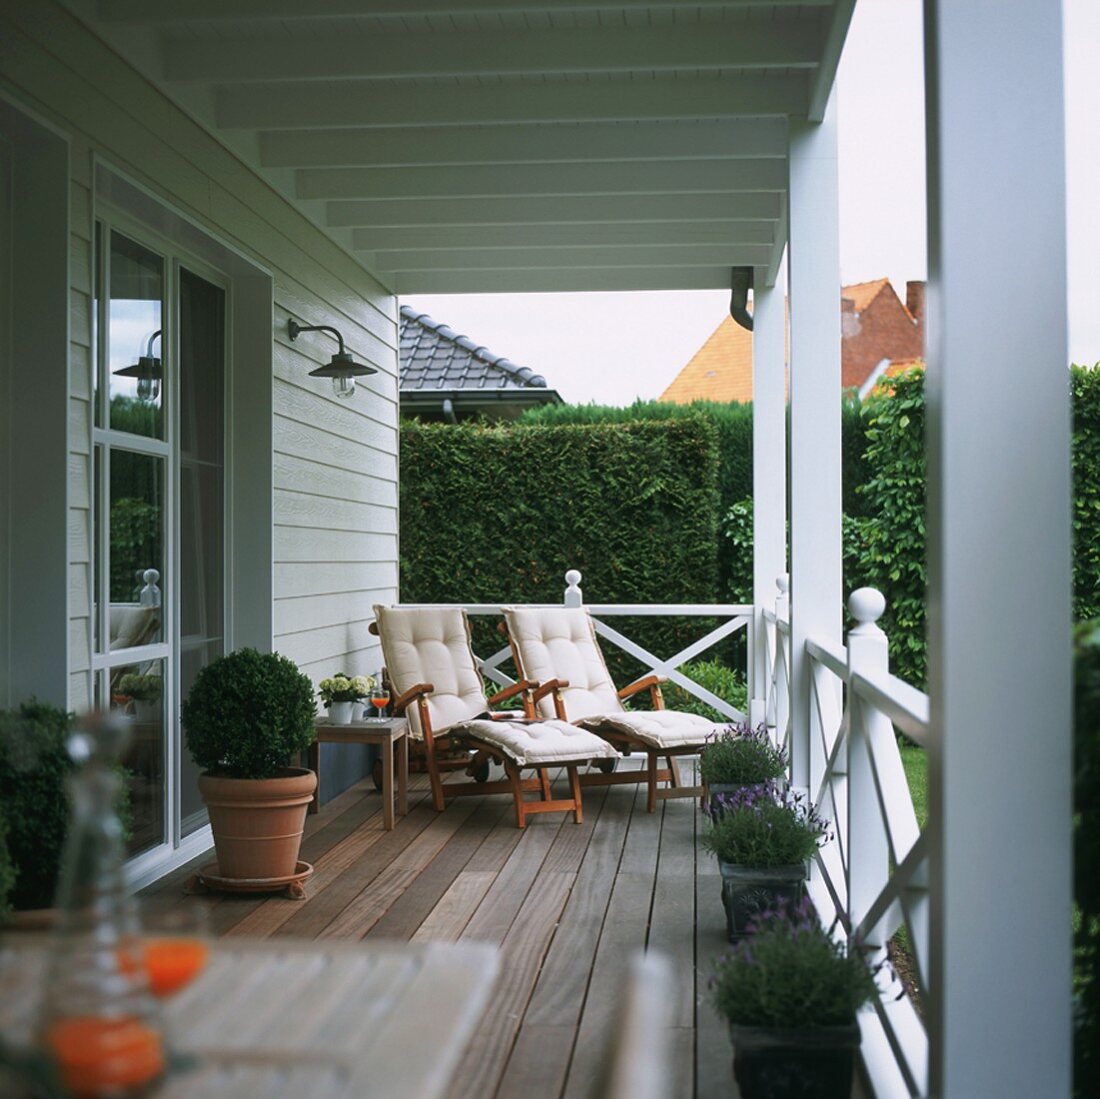 Terrace with wooden boards, planters and upholstered loungers